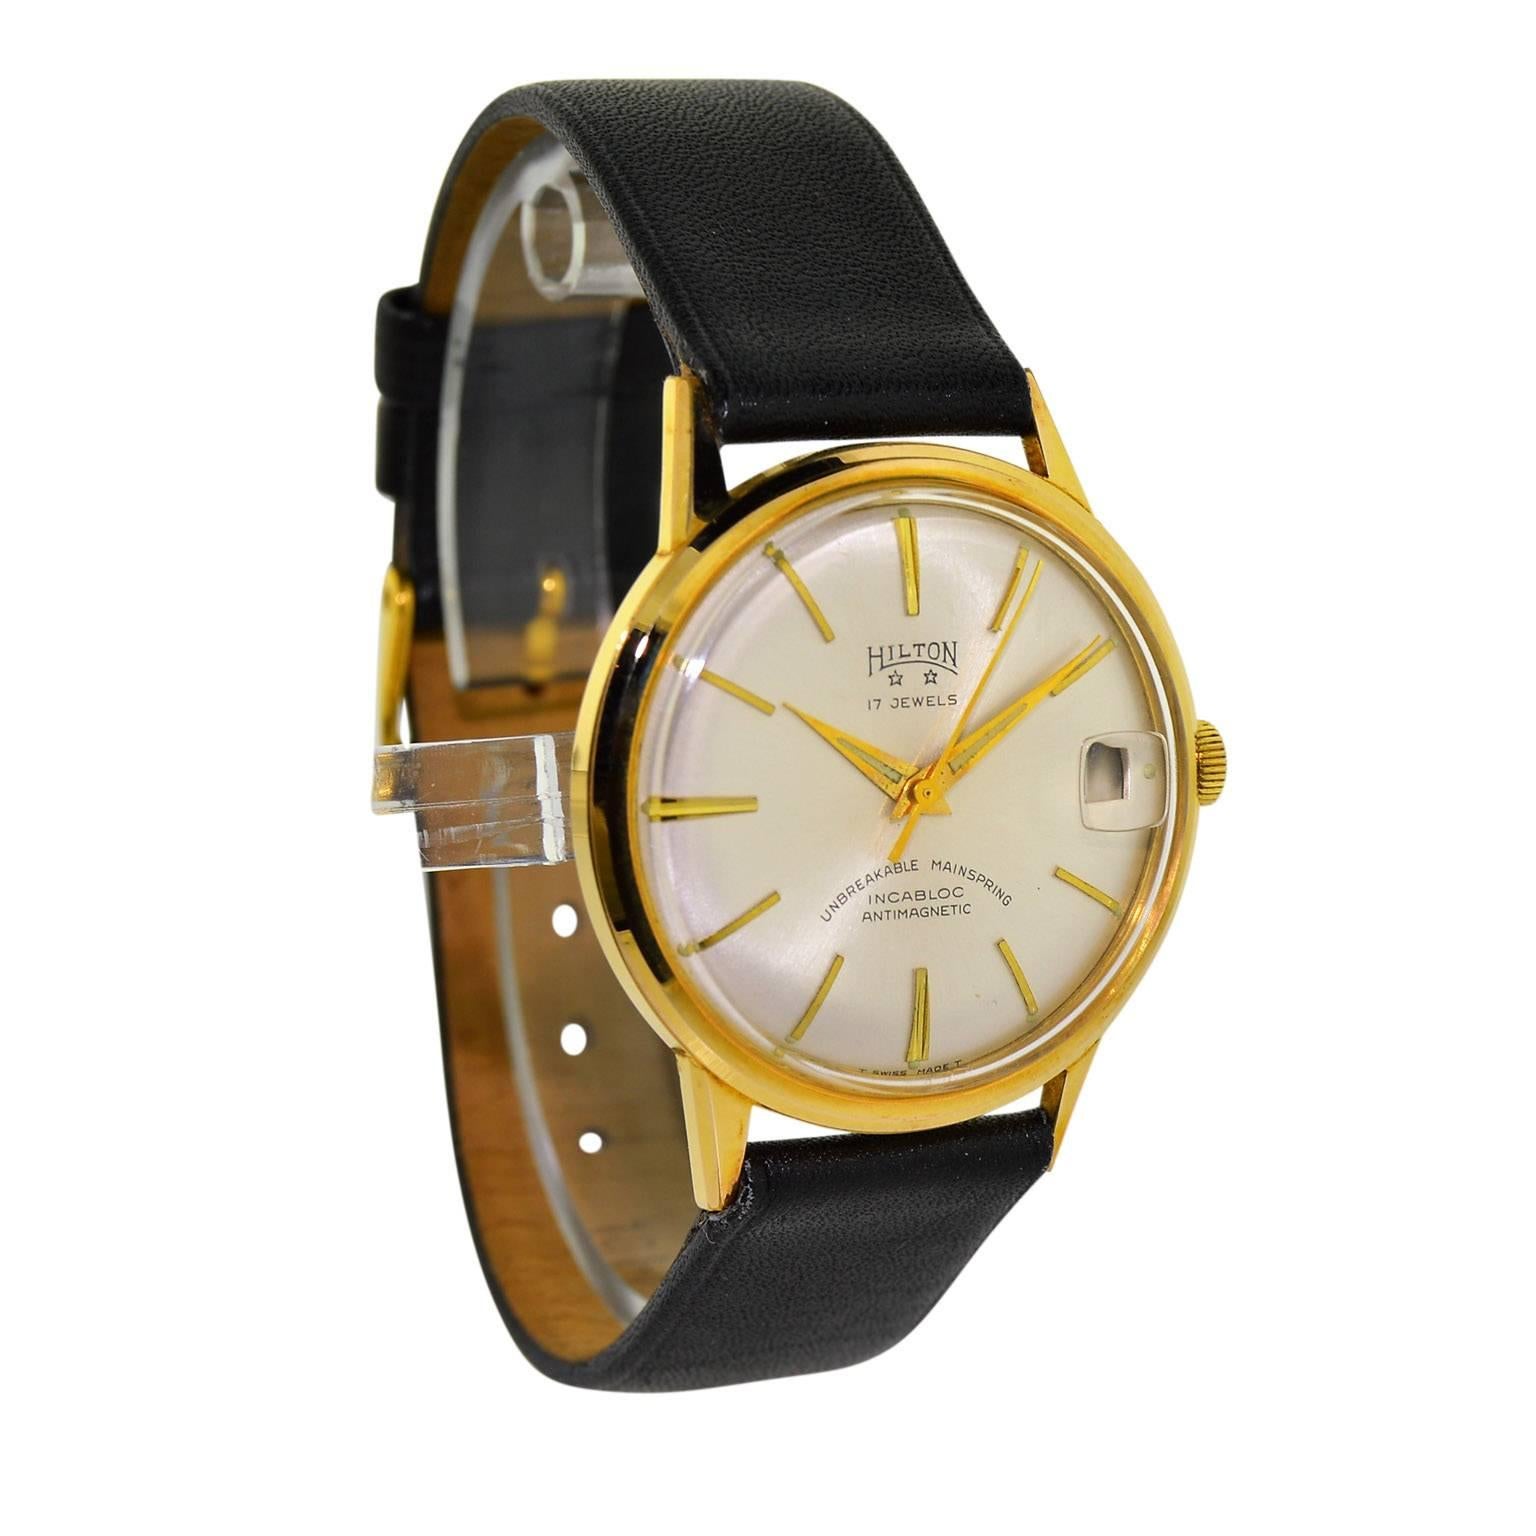 FACTORY / HOUSE: Hilton by Enzo Watch Company
STYLE / REFERENCE: Moderne / Round
METAL / MATERIAL: Yellow Gold Filled
CIRCA: 1950 / 60's
DIMENSIONS: 41mm X 34mm
MOVEMENT / CALIBER: Manual Winding / 17 Jewels / Cal. Font 72-4n 
DIAL / HANDS: Original